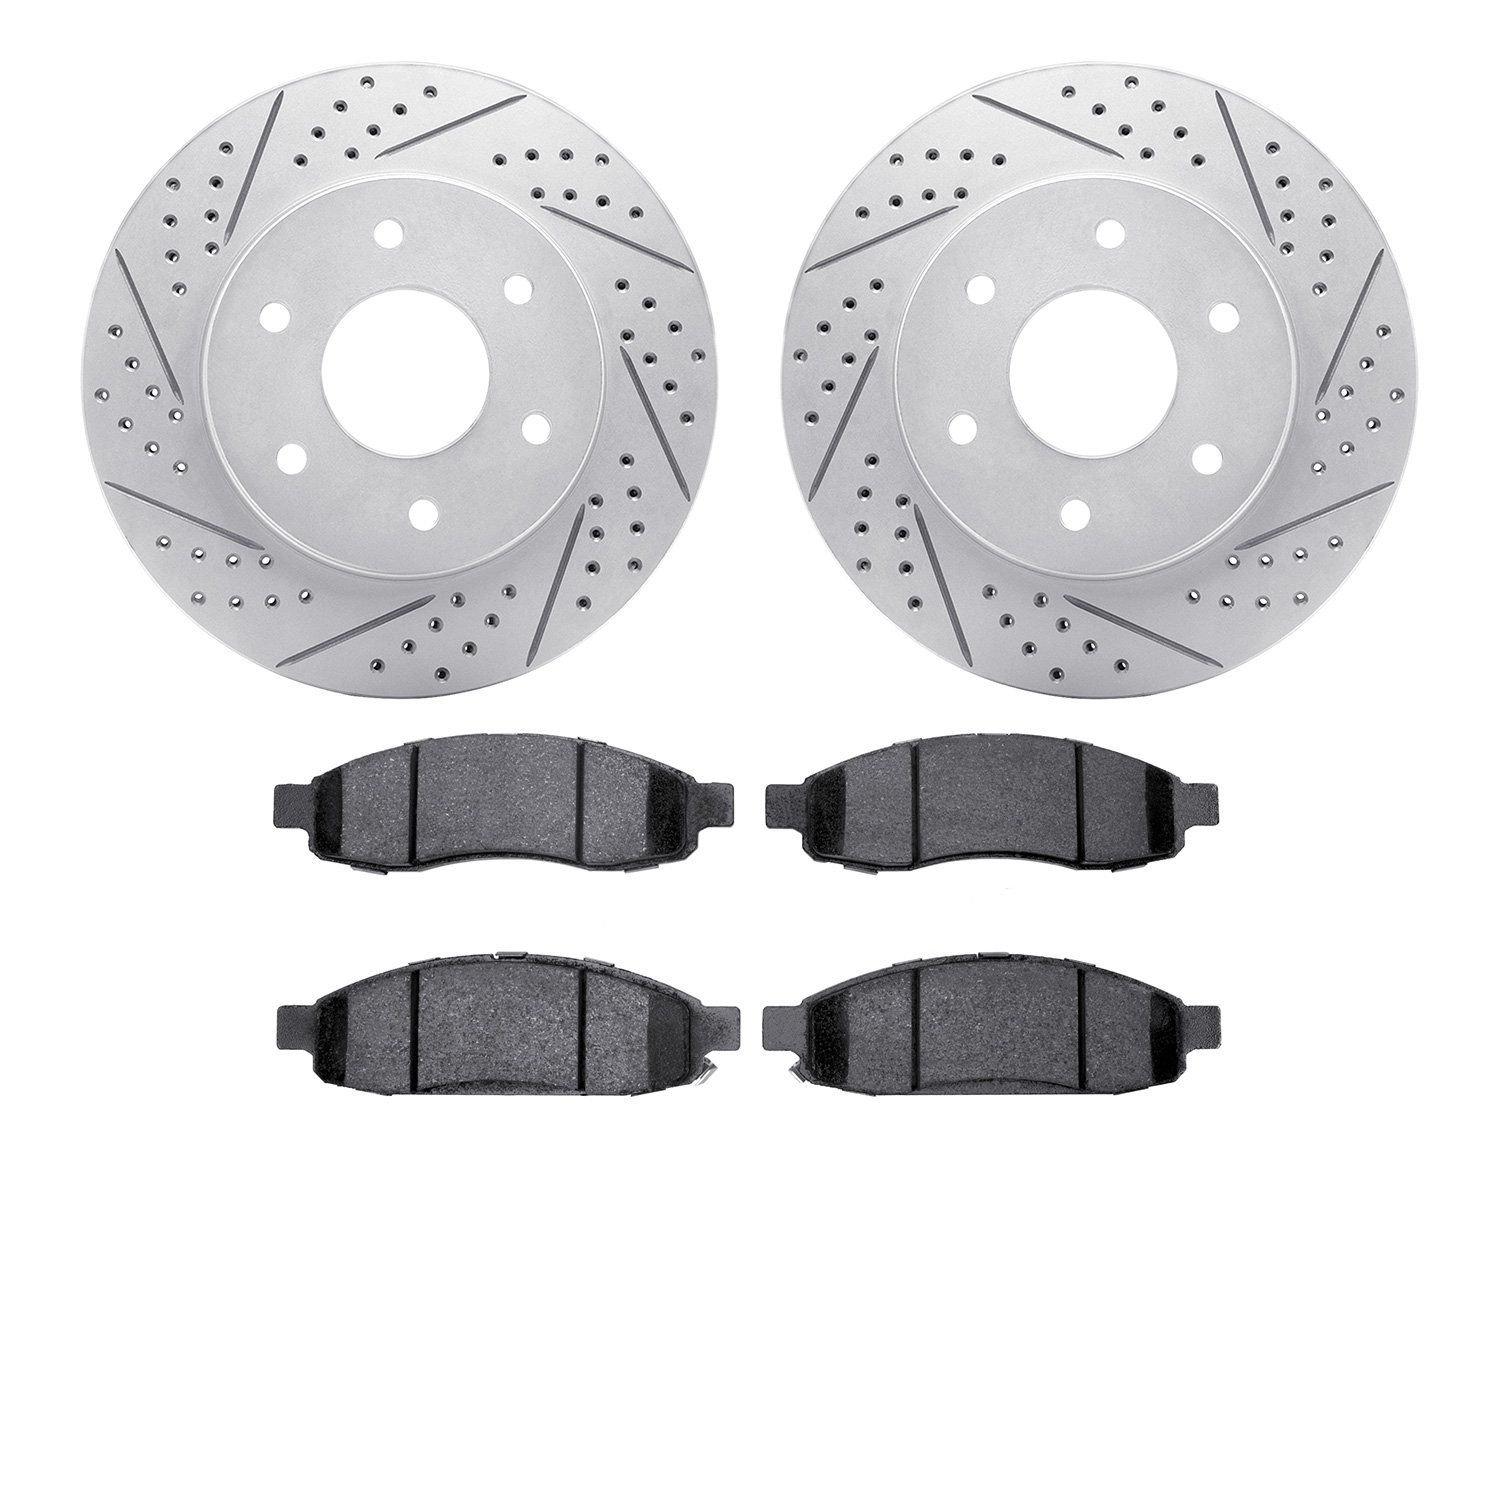 2402-67002 Geoperformance Drilled/Slotted Brake Rotors with Ultimate-Duty Brake Pads Kit, 2004-2005 Infiniti/Nissan, Position: F